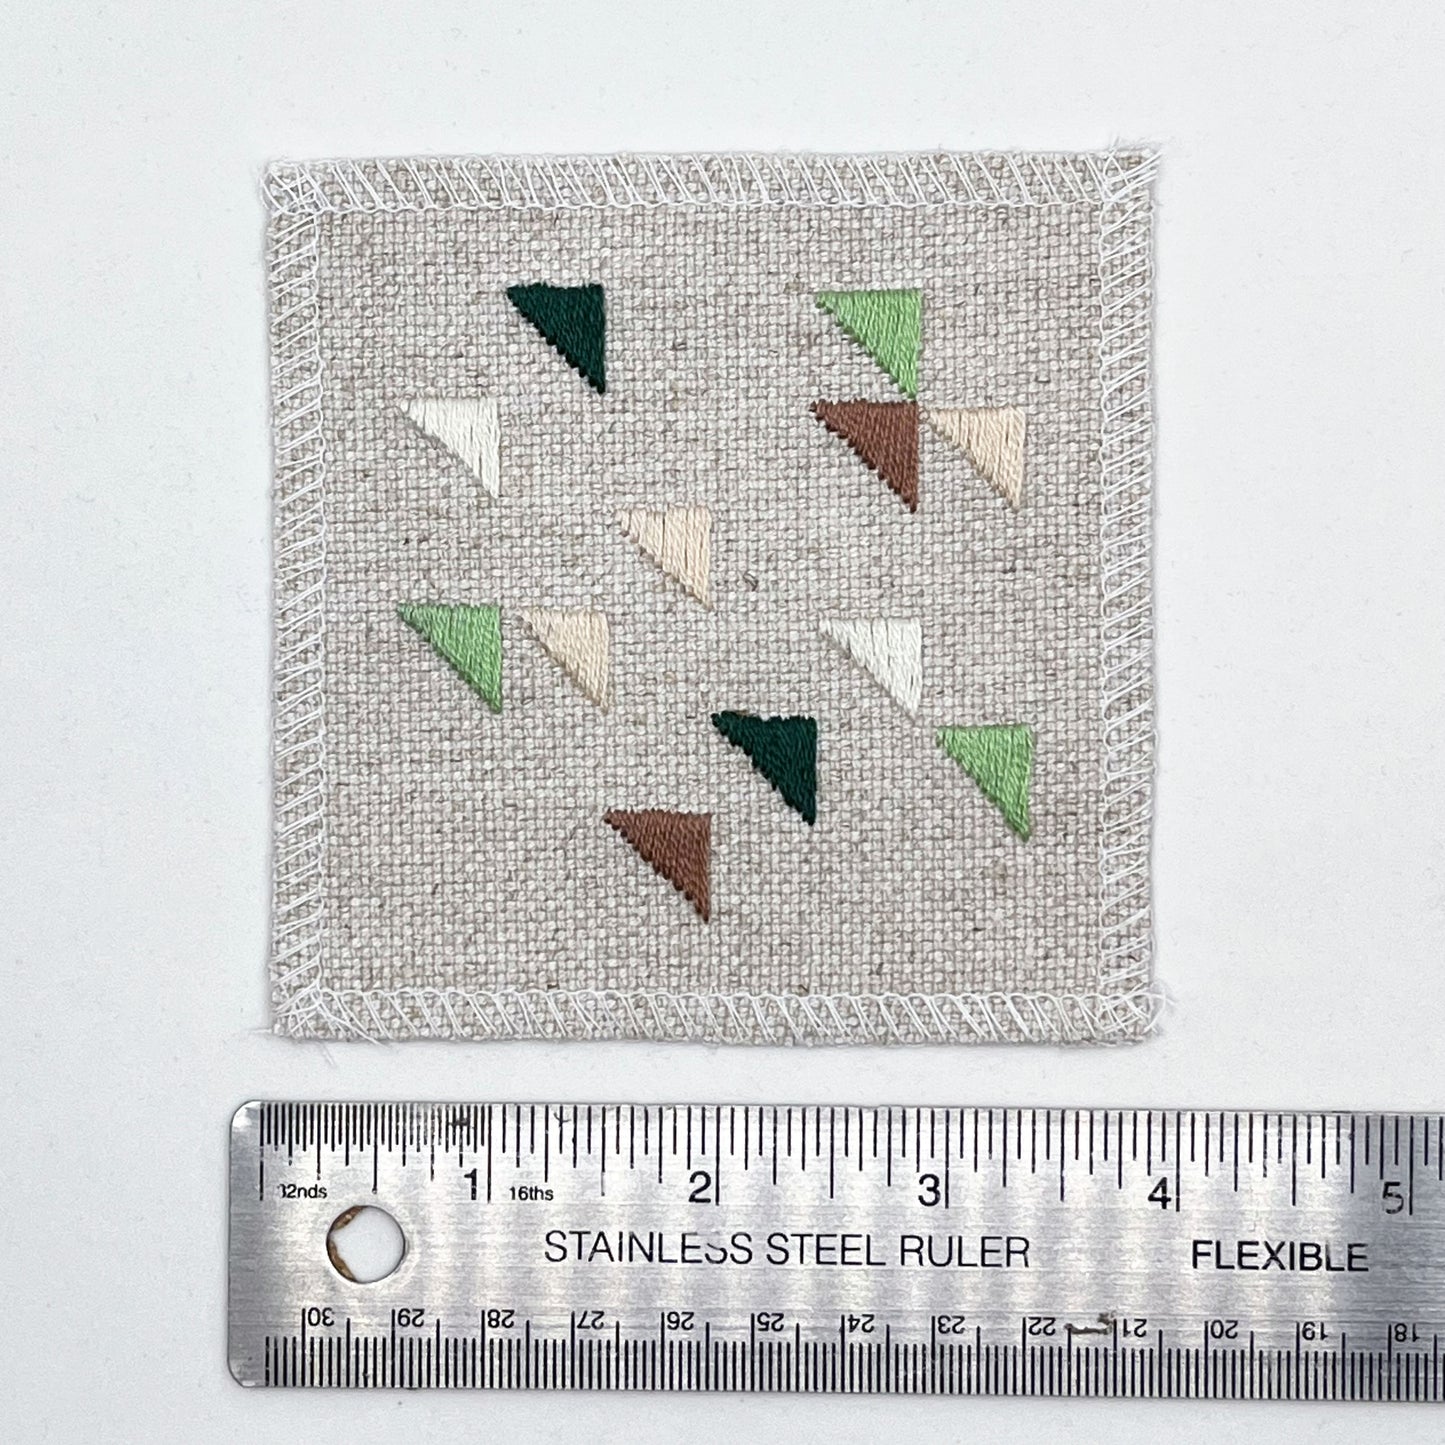 a square natural colored patch embroidered with randomly placed triangles in peaches, mauves and greens, placed next to a metal ruler to show a width of four inches, on a white background